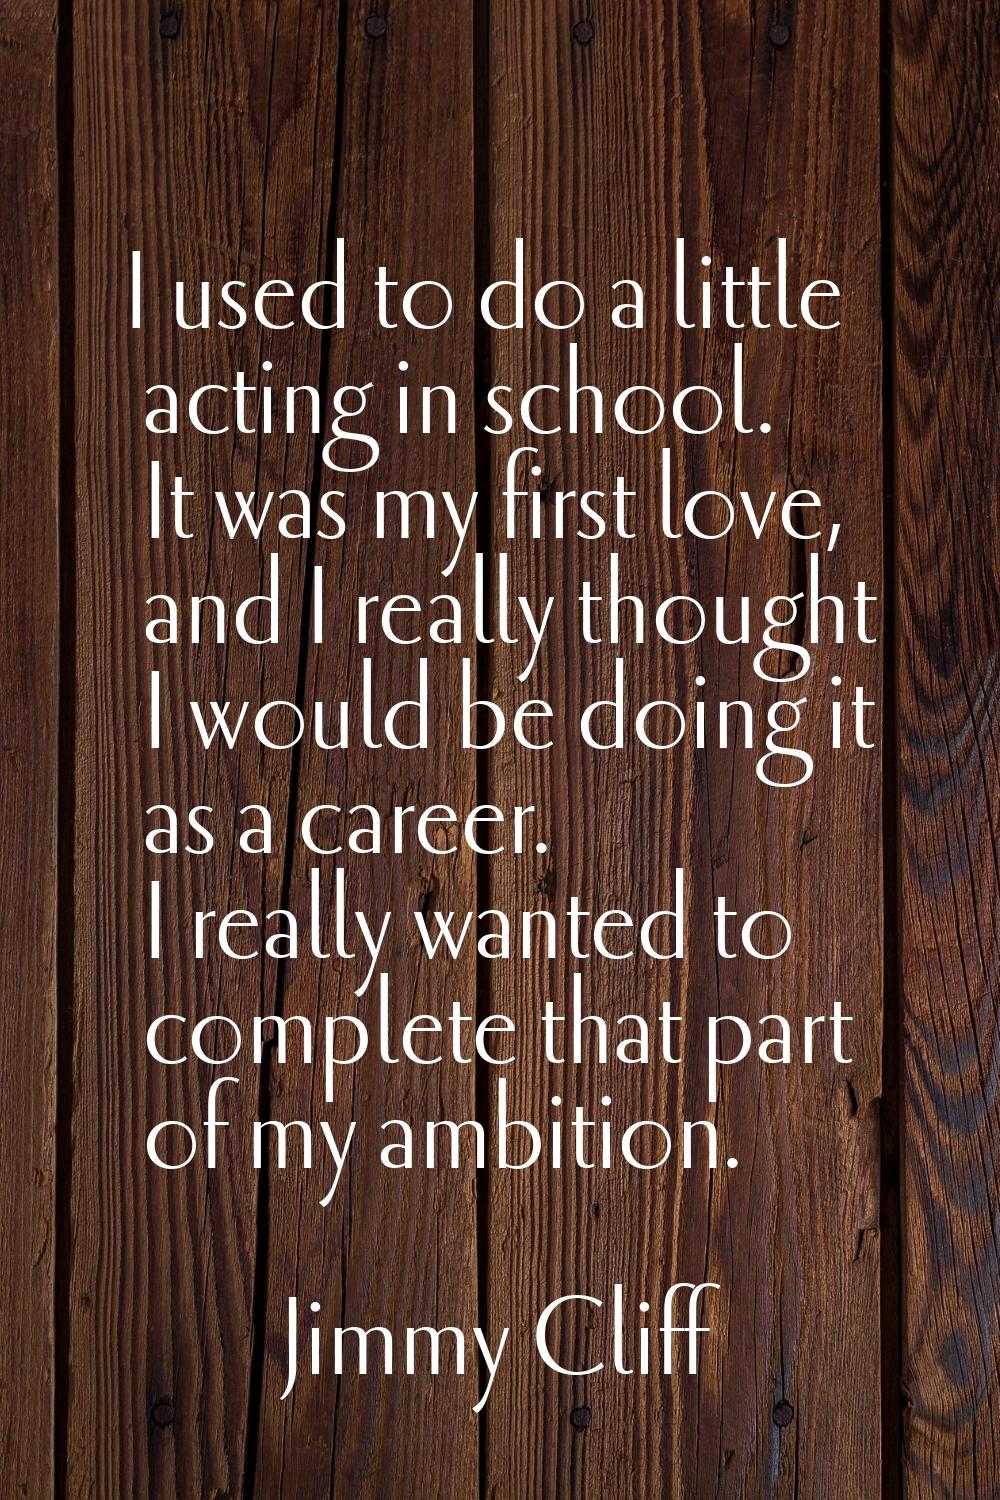 I used to do a little acting in school. It was my first love, and I really thought I would be doing